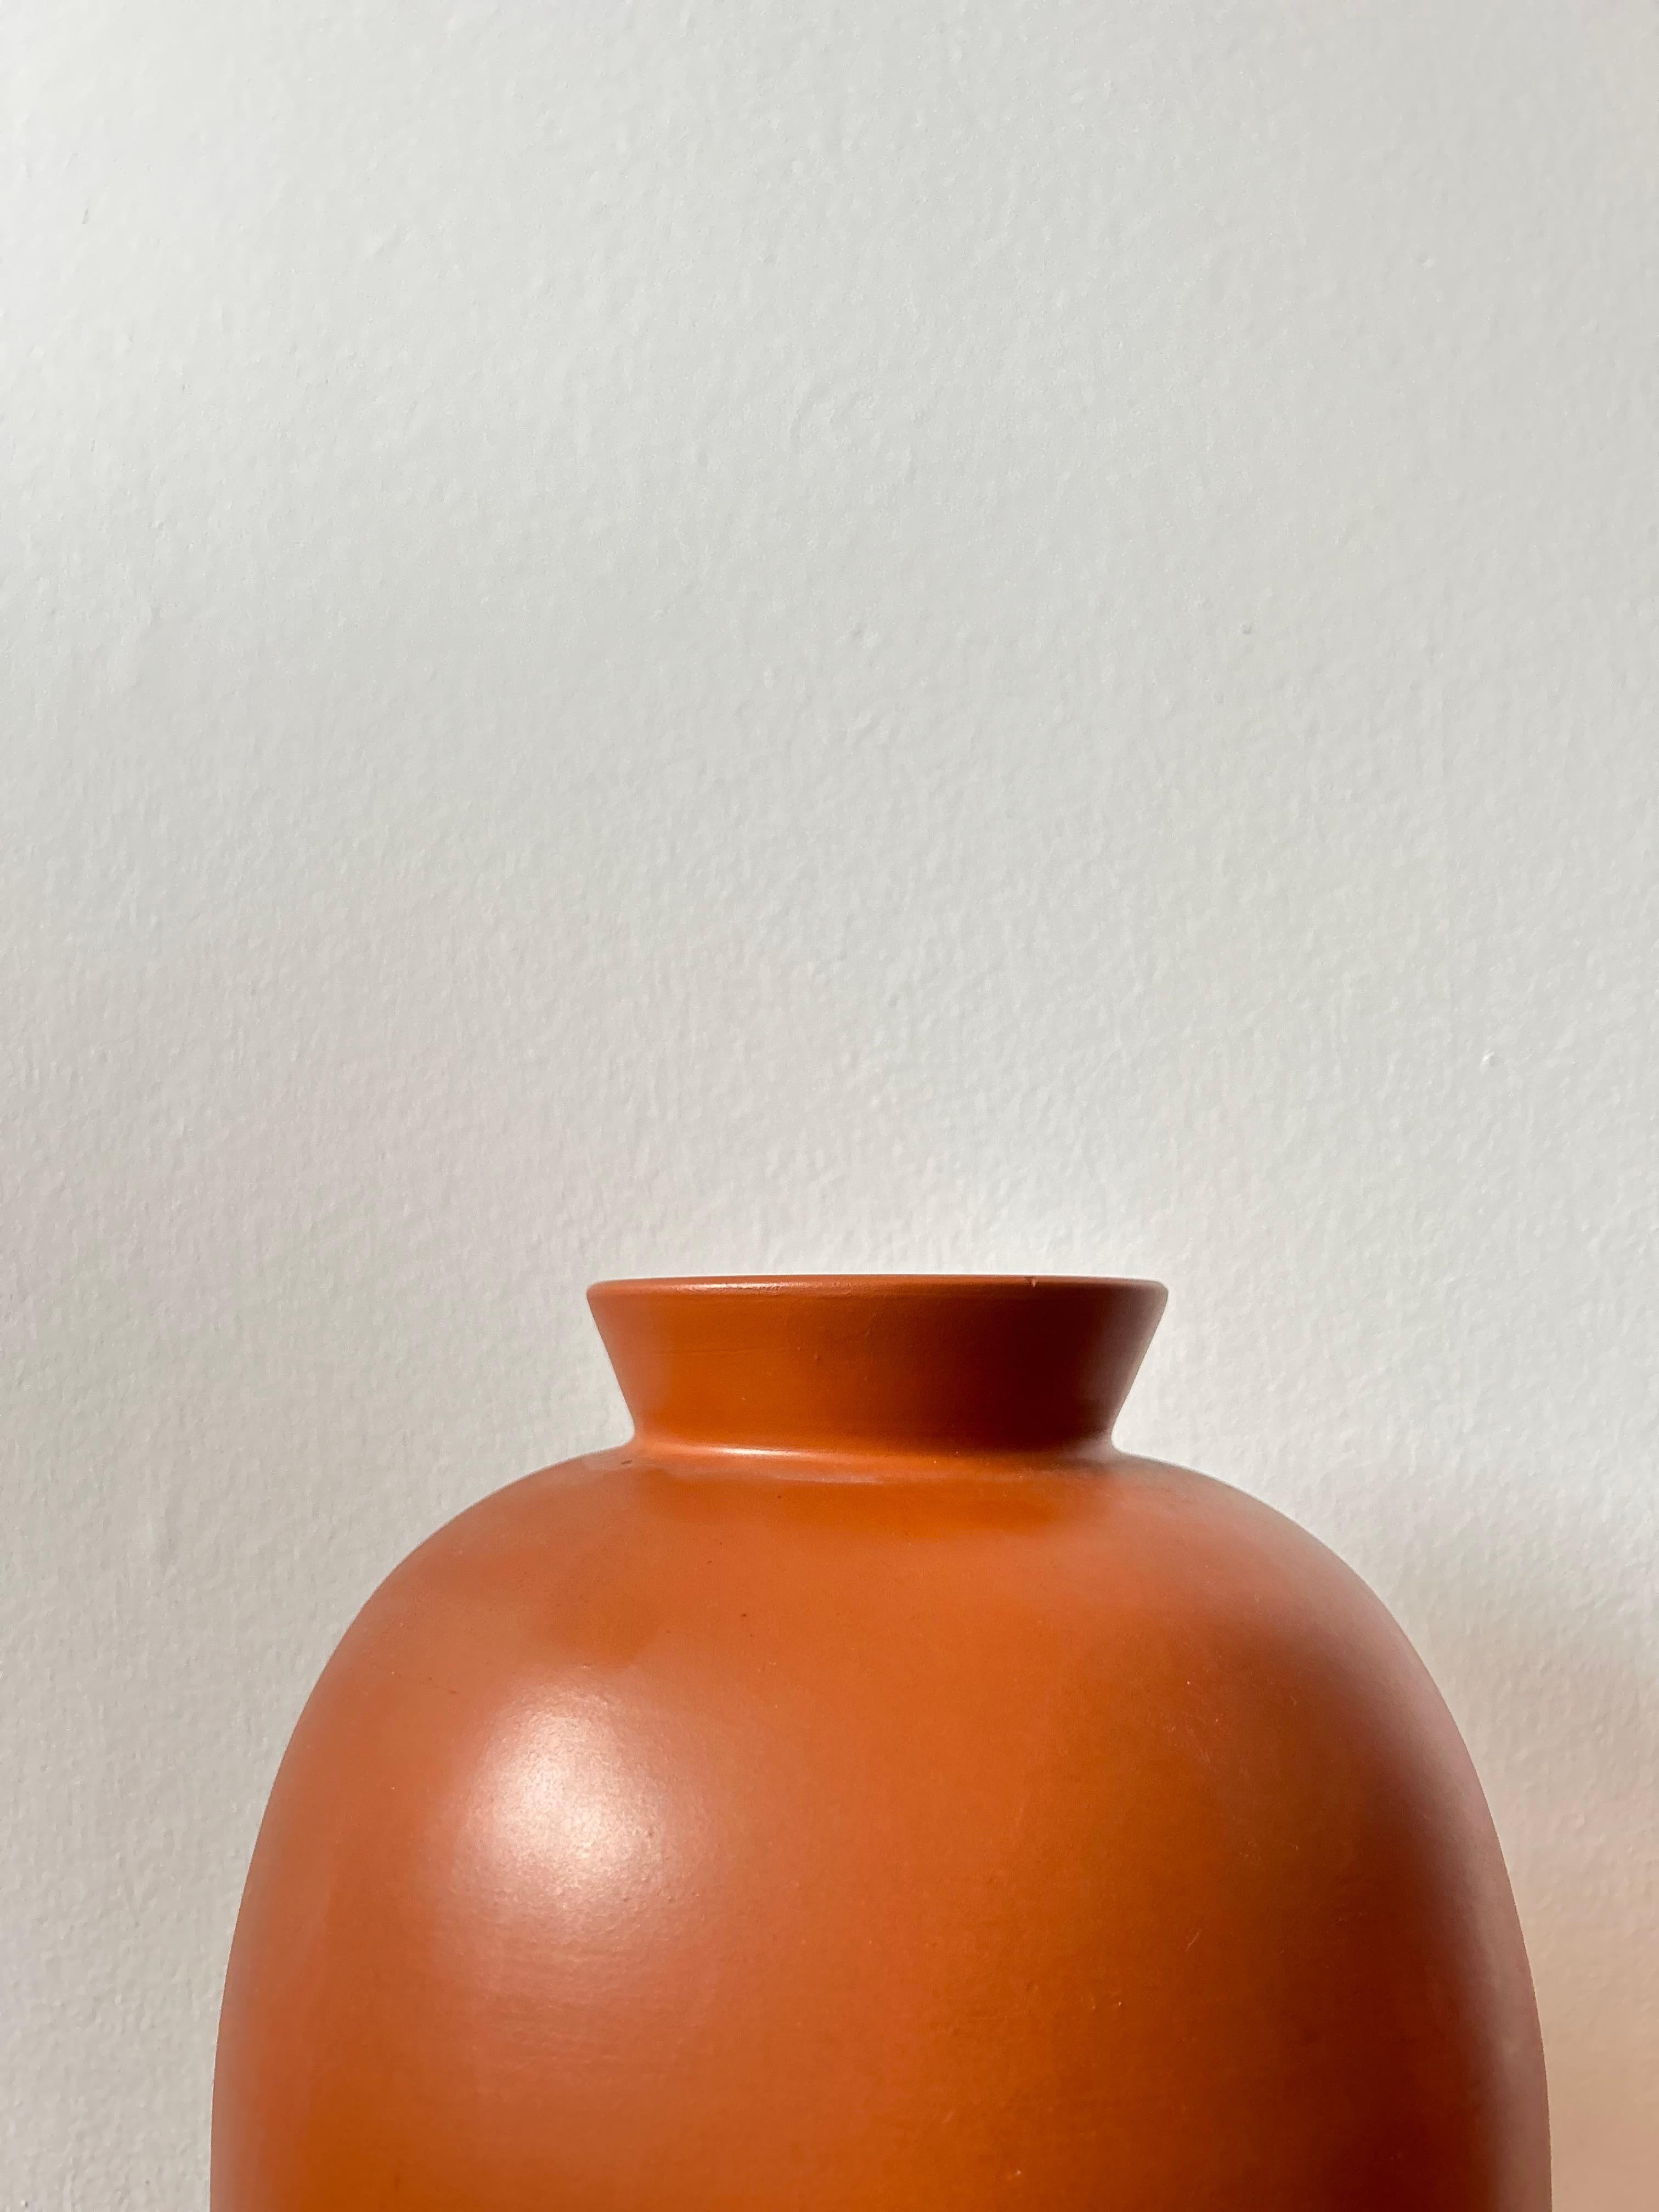 Elevate your interior decor with this exquisite 45 cm tall floor vase crafted by the renowned Swedish manufacturer Upsala Ekeby during the 1960s. This striking piece is a testament to Scandinavian design excellence, combining both form and function